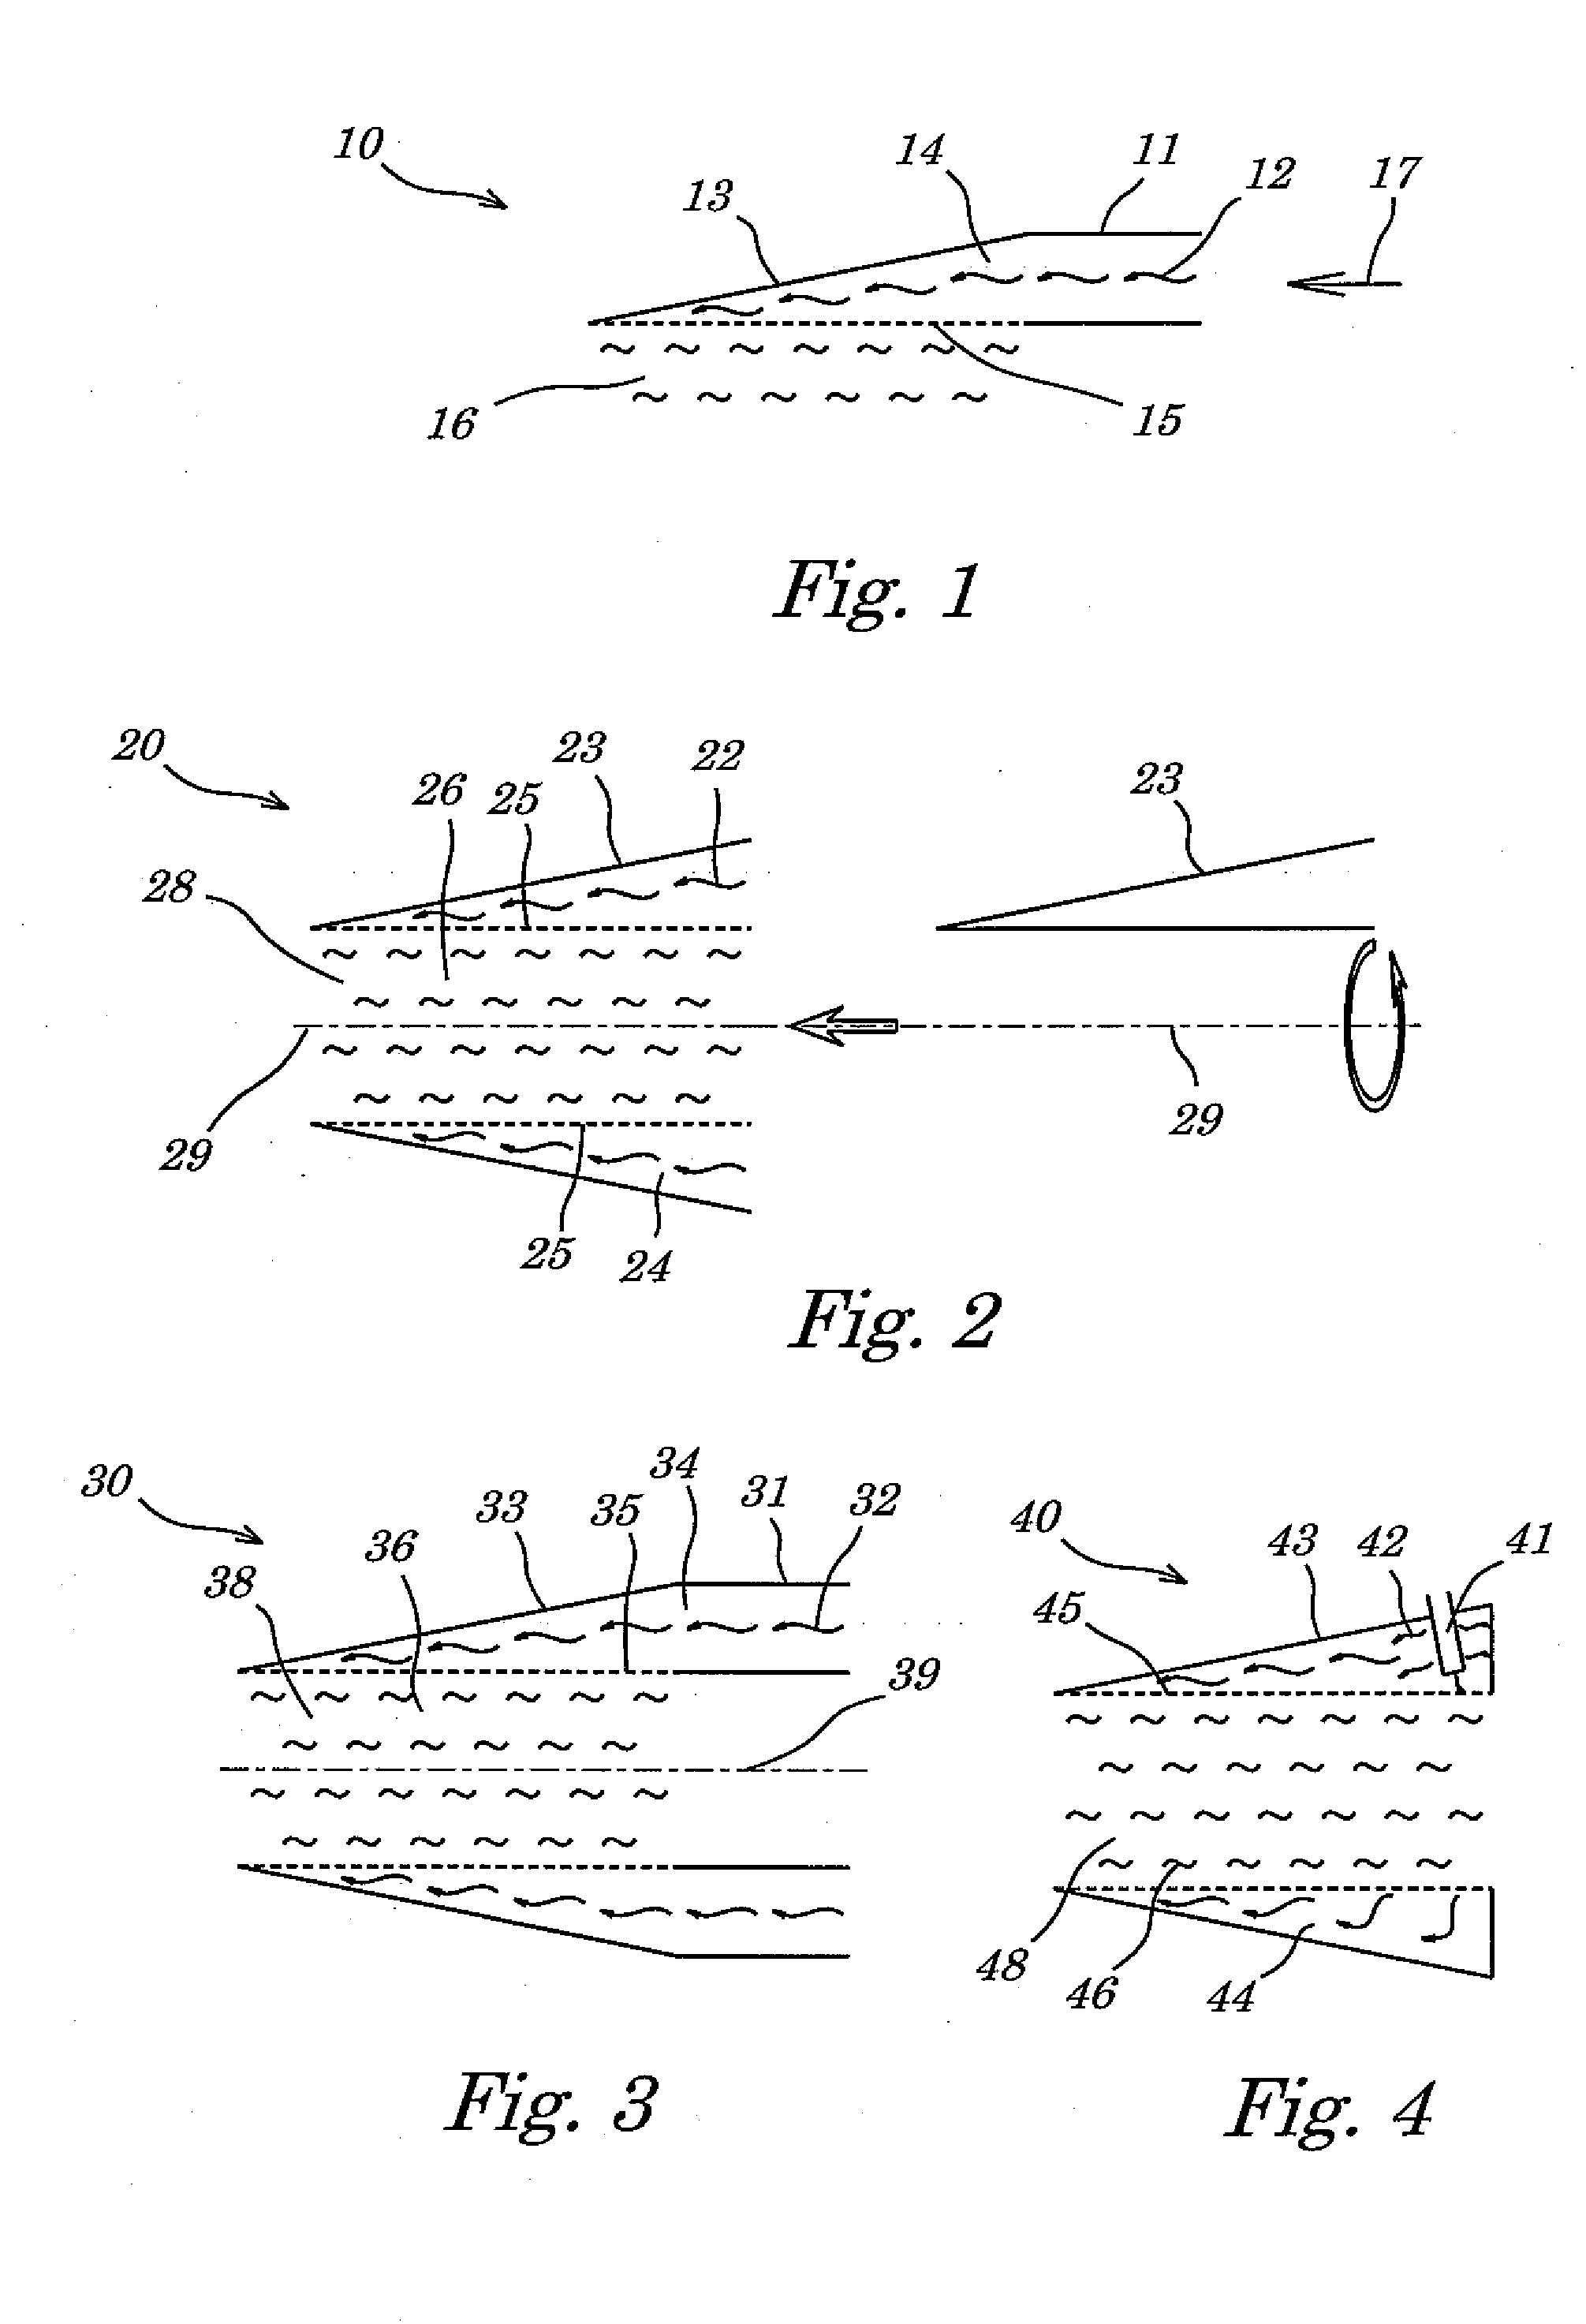 Applicator and apparatus for heating samples by microwave radiation